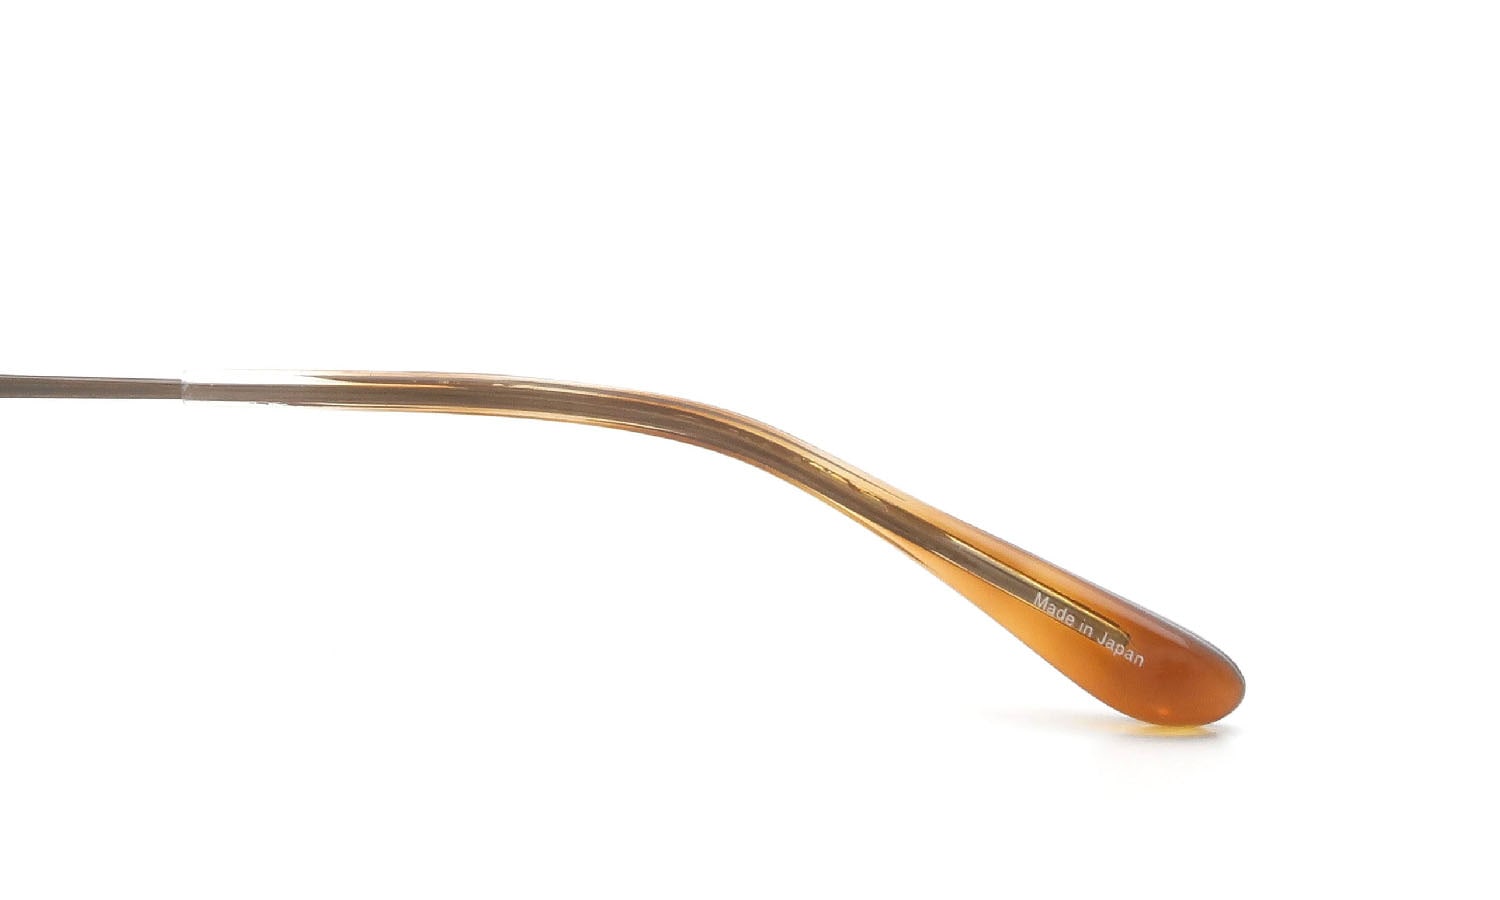 OLIVER PEOPLES  Dickens-P MC #001